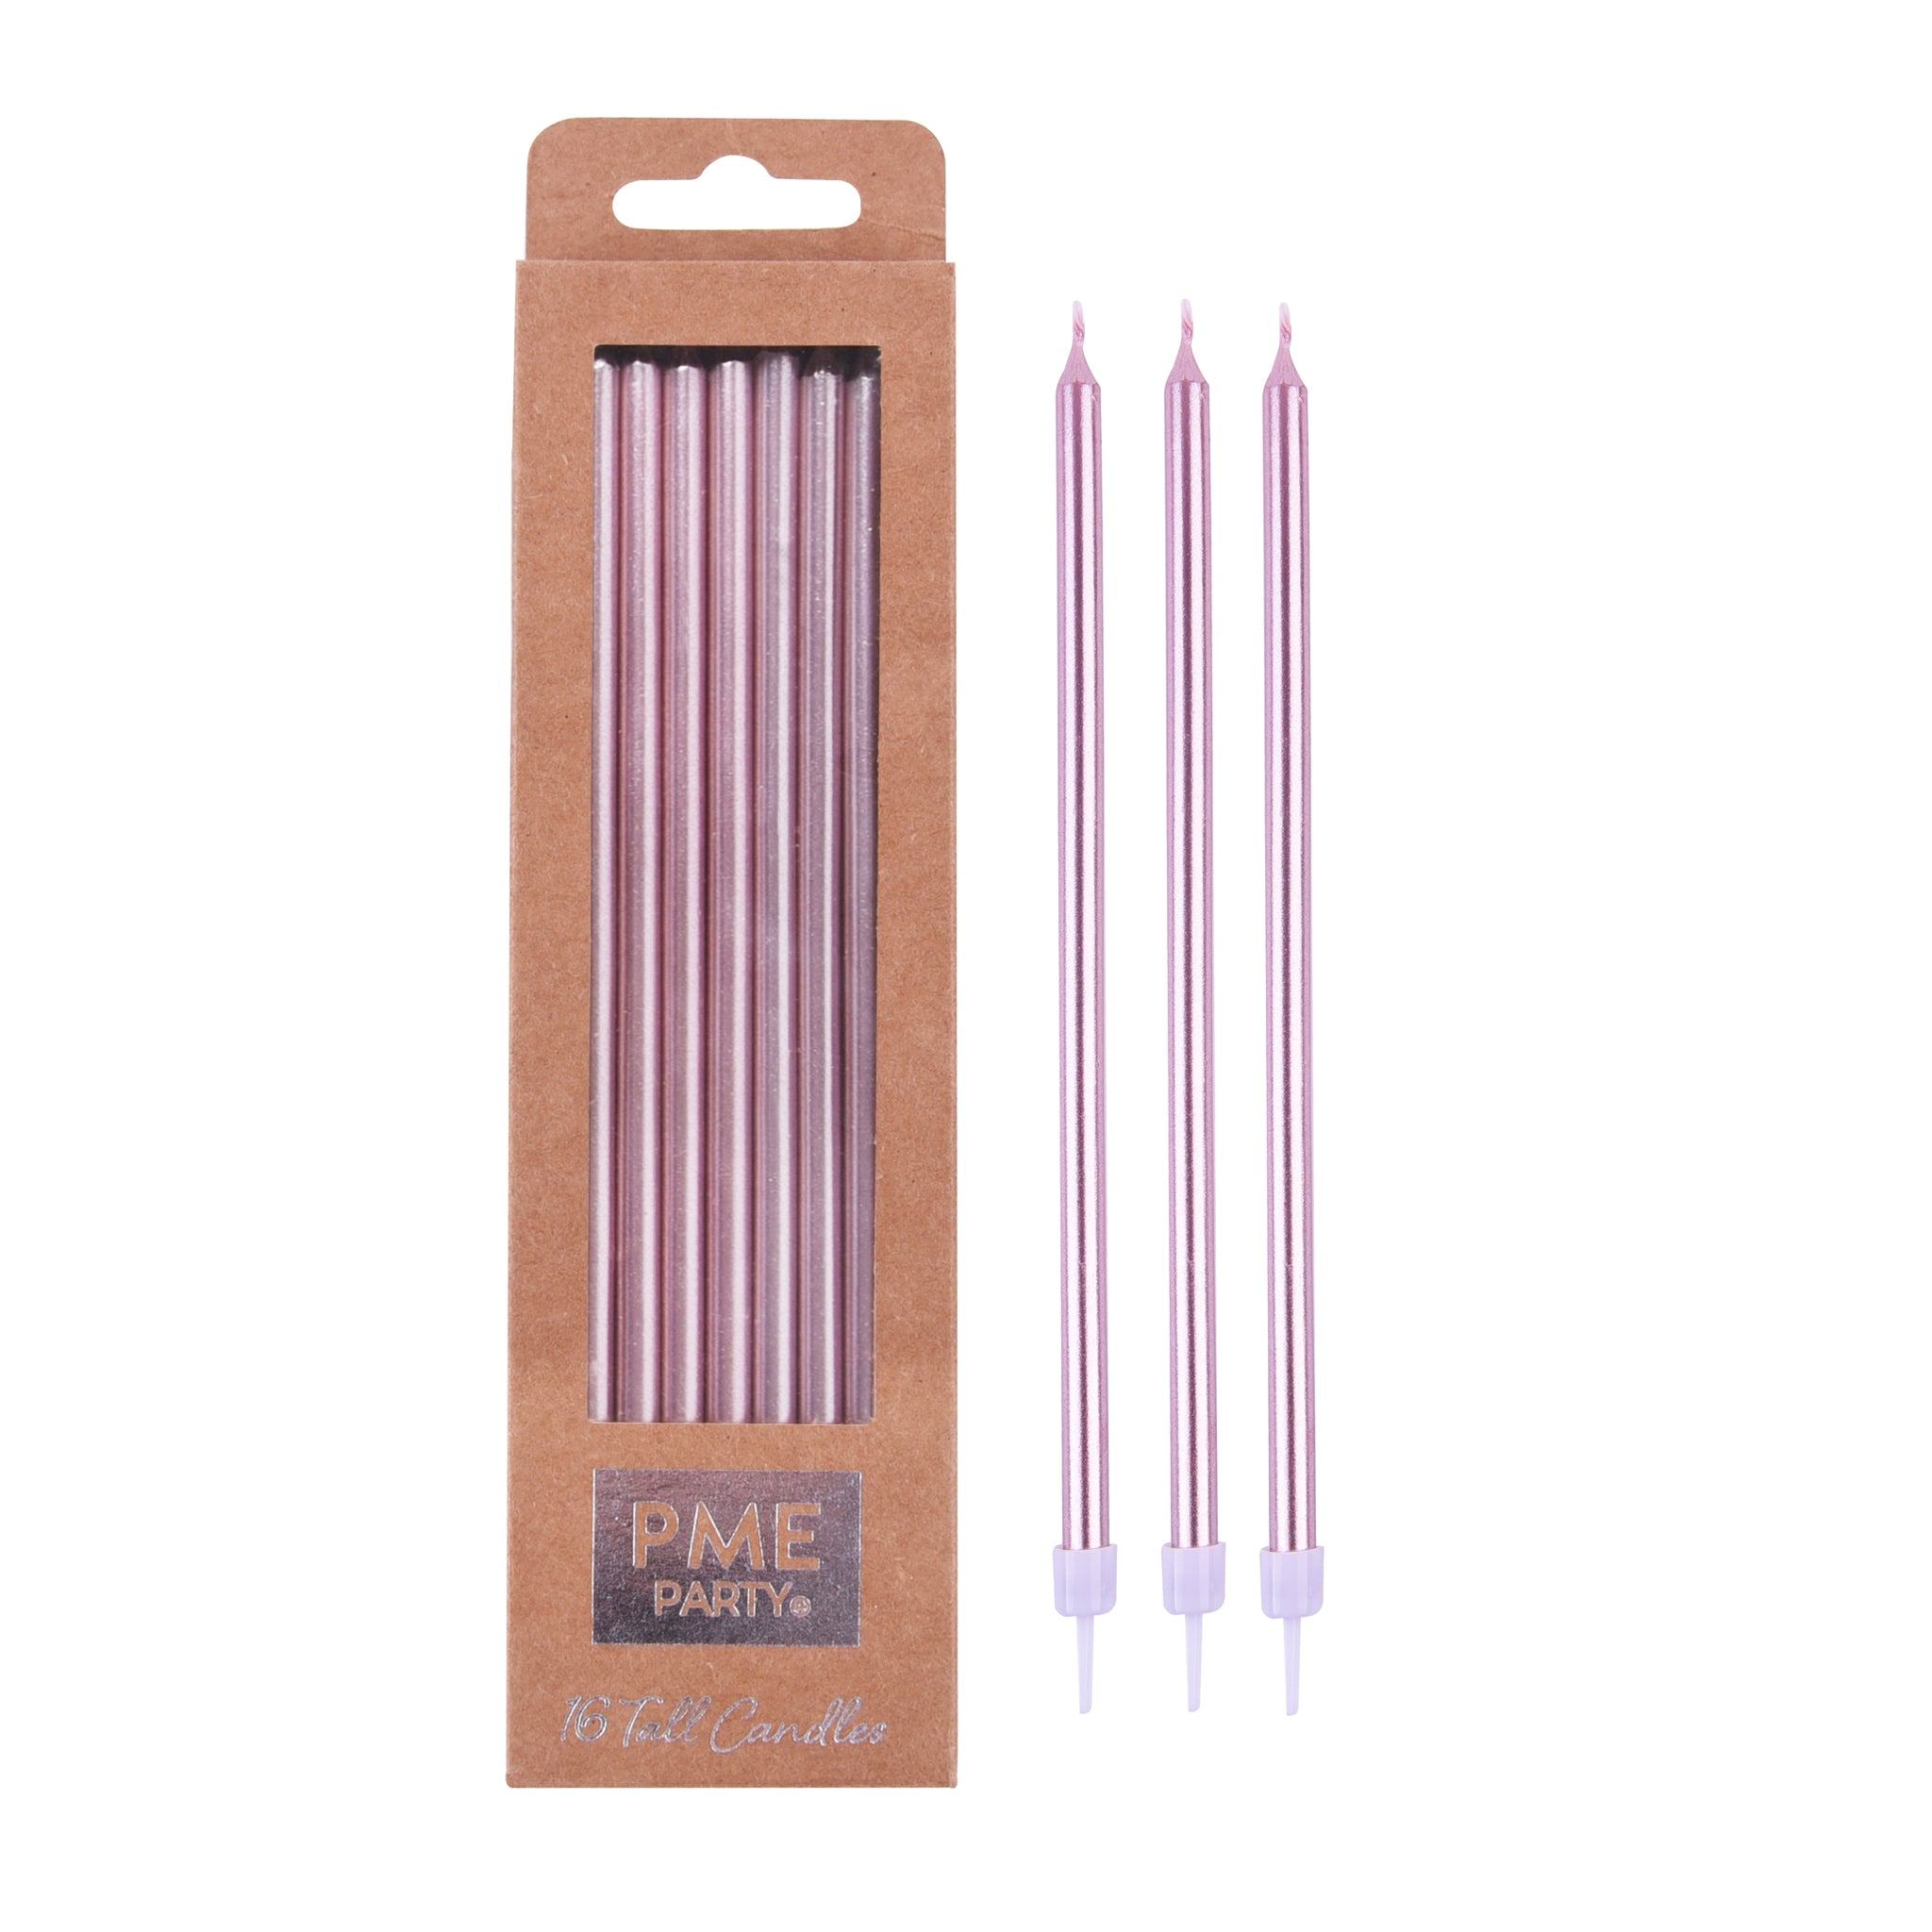 PME Extra Tall Candles 18cm 16pk